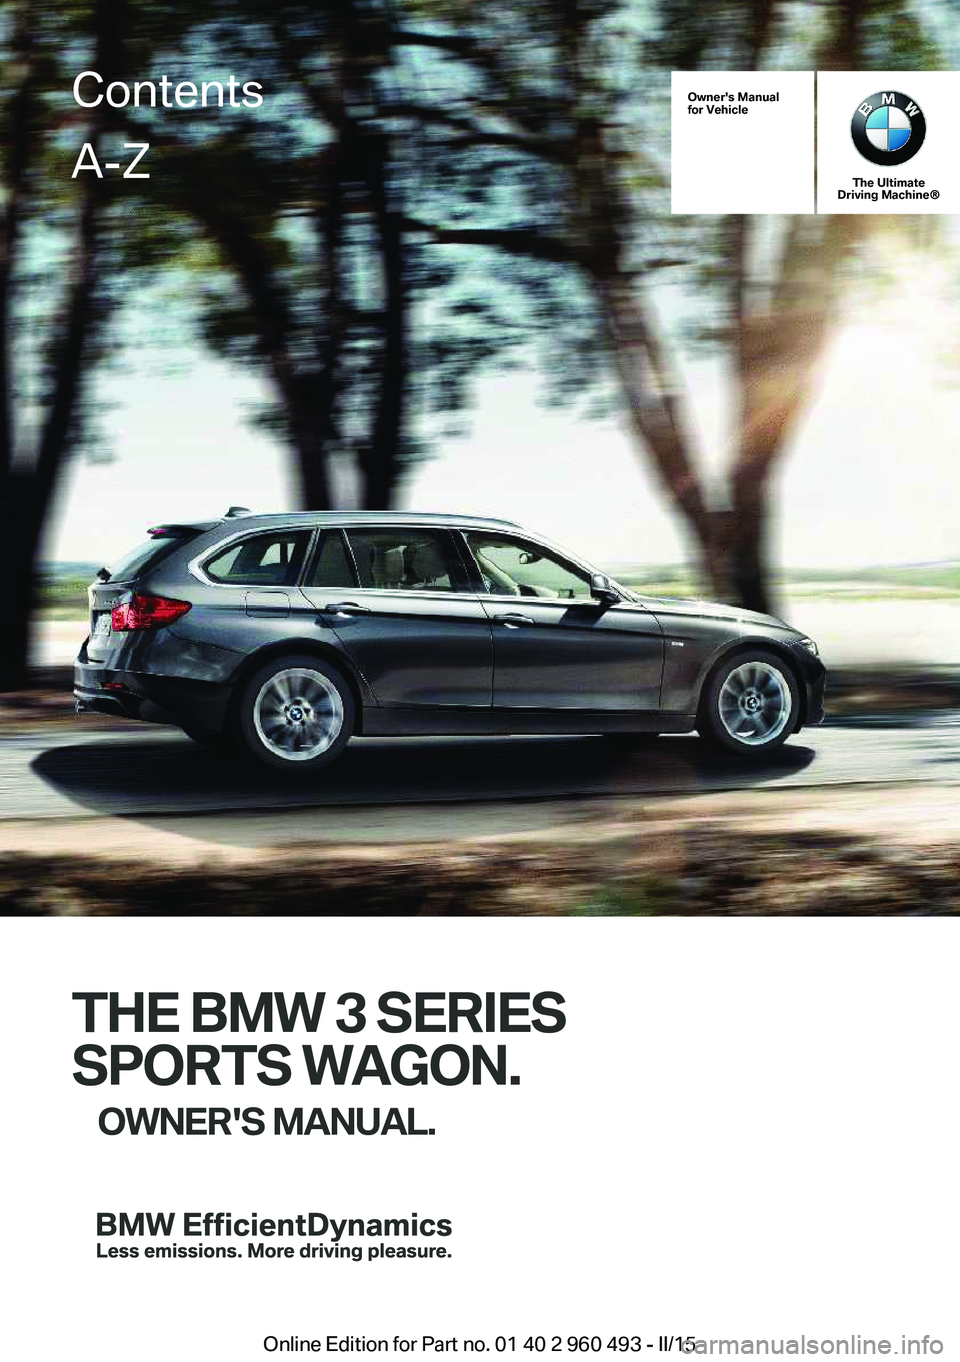 BMW 328D XDRIVE SPORTS WAGON 2016  Owners Manual Owner's Manual
for Vehicle
The Ultimate
Driving Machine®
THE BMW 3 SERIES
SPORTS WAGON. OWNER'S MANUAL.
ContentsA-Z
Online Edition for Part no. 01 40 2 960 493 - II/15   